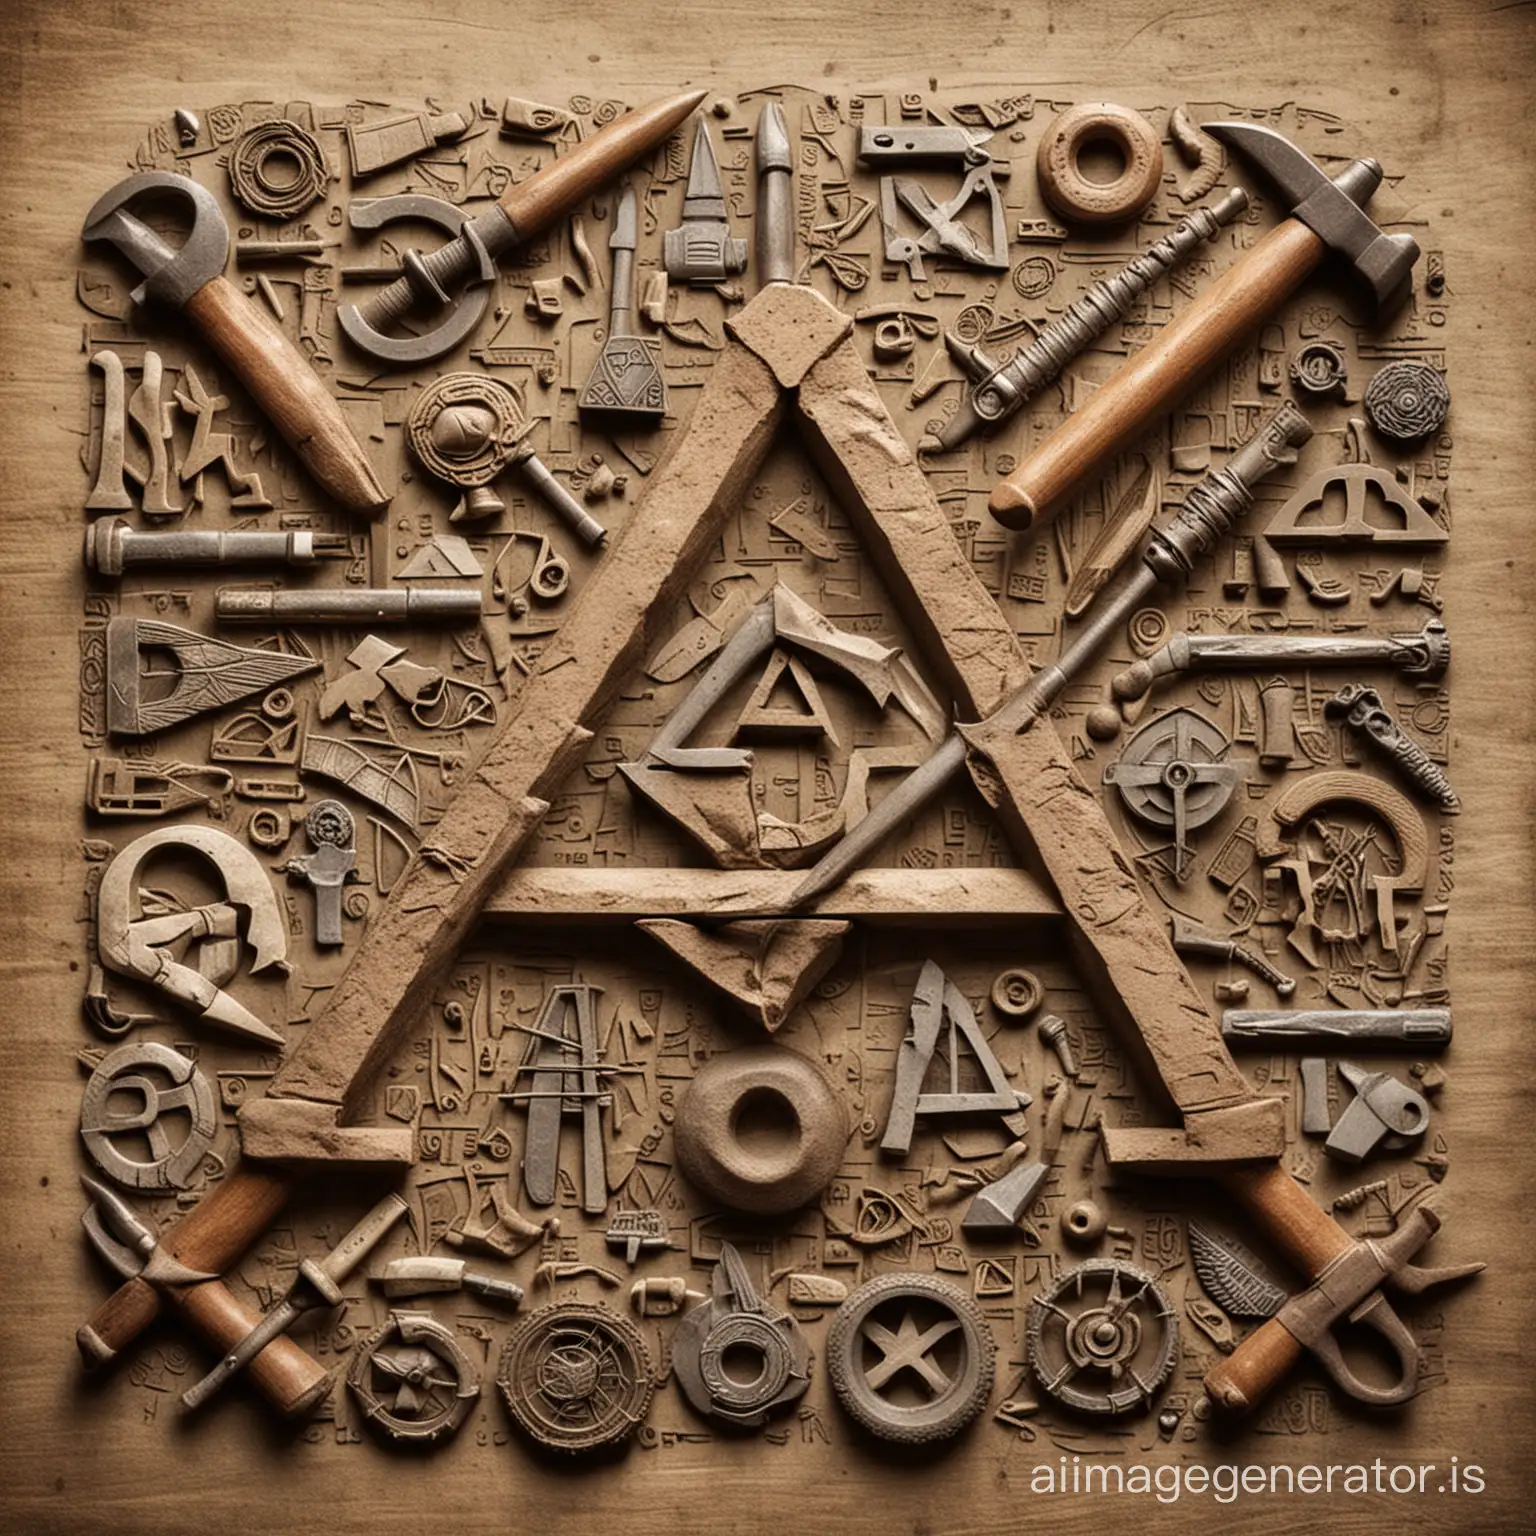 Bad ass free masonry collage of symbols and working tools